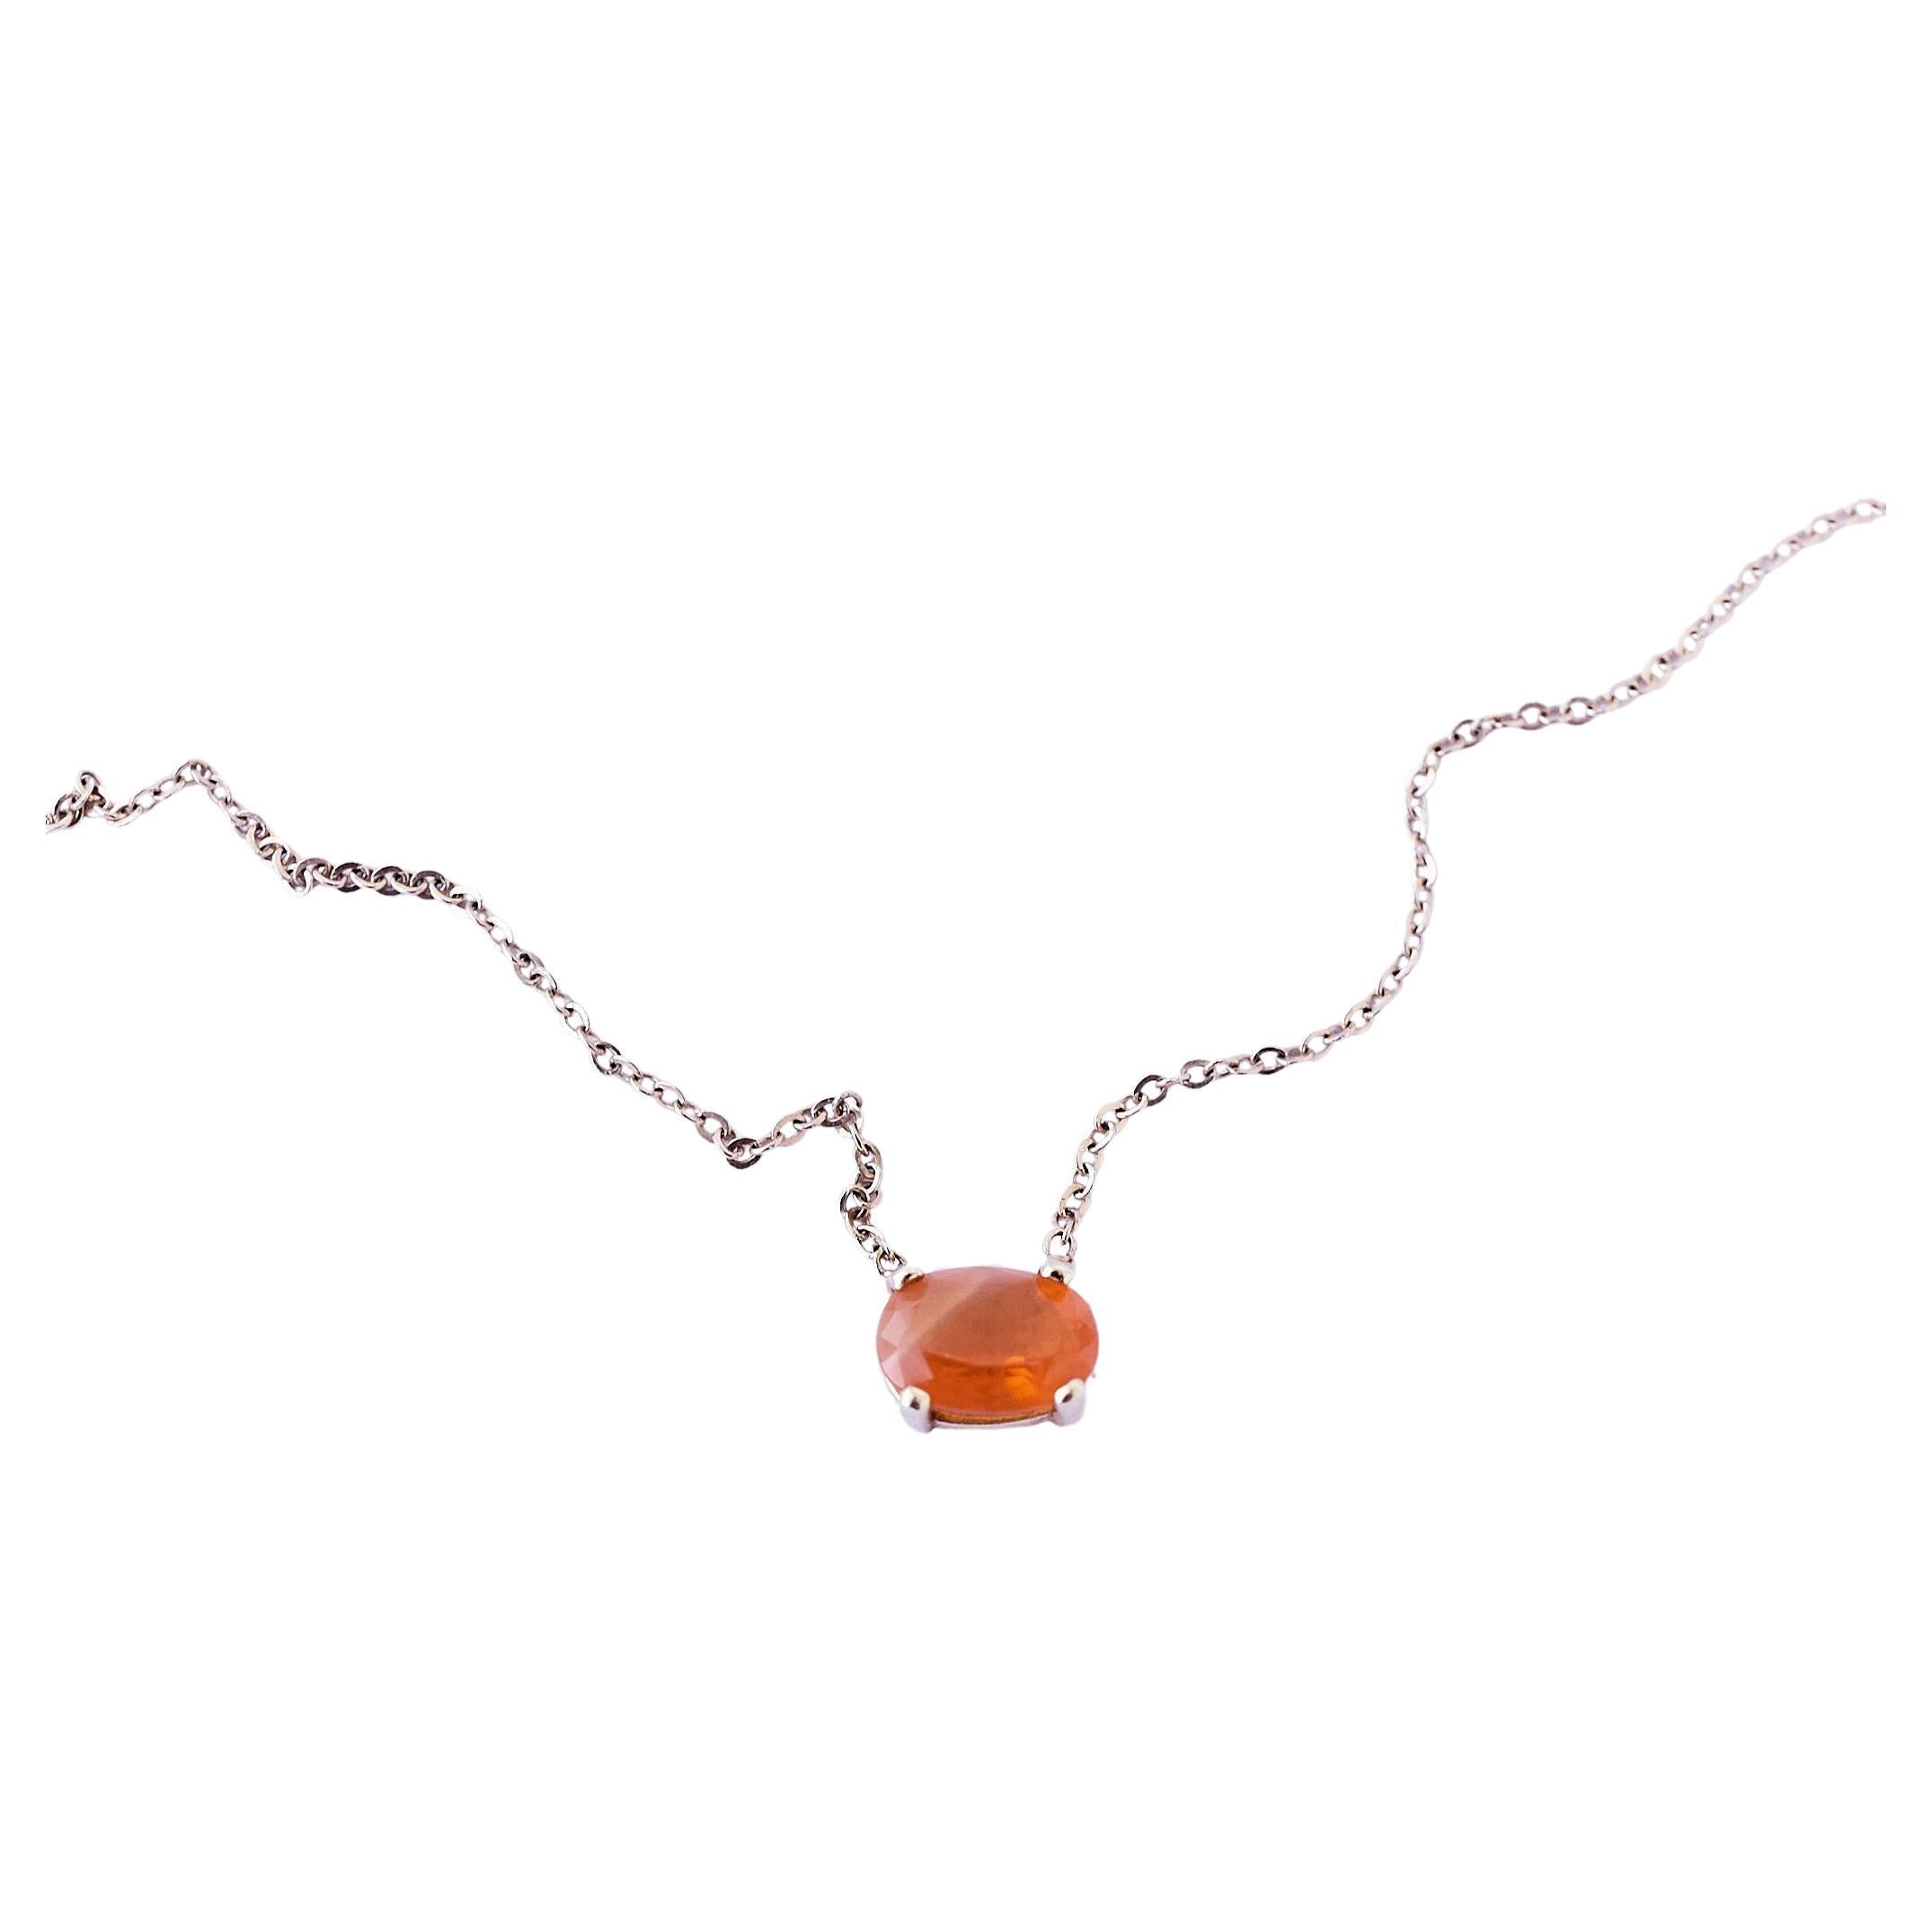 Fire Opal Oval in Prong 14 Karat Gold Chain Necklace Choker J Dauphin For Sale